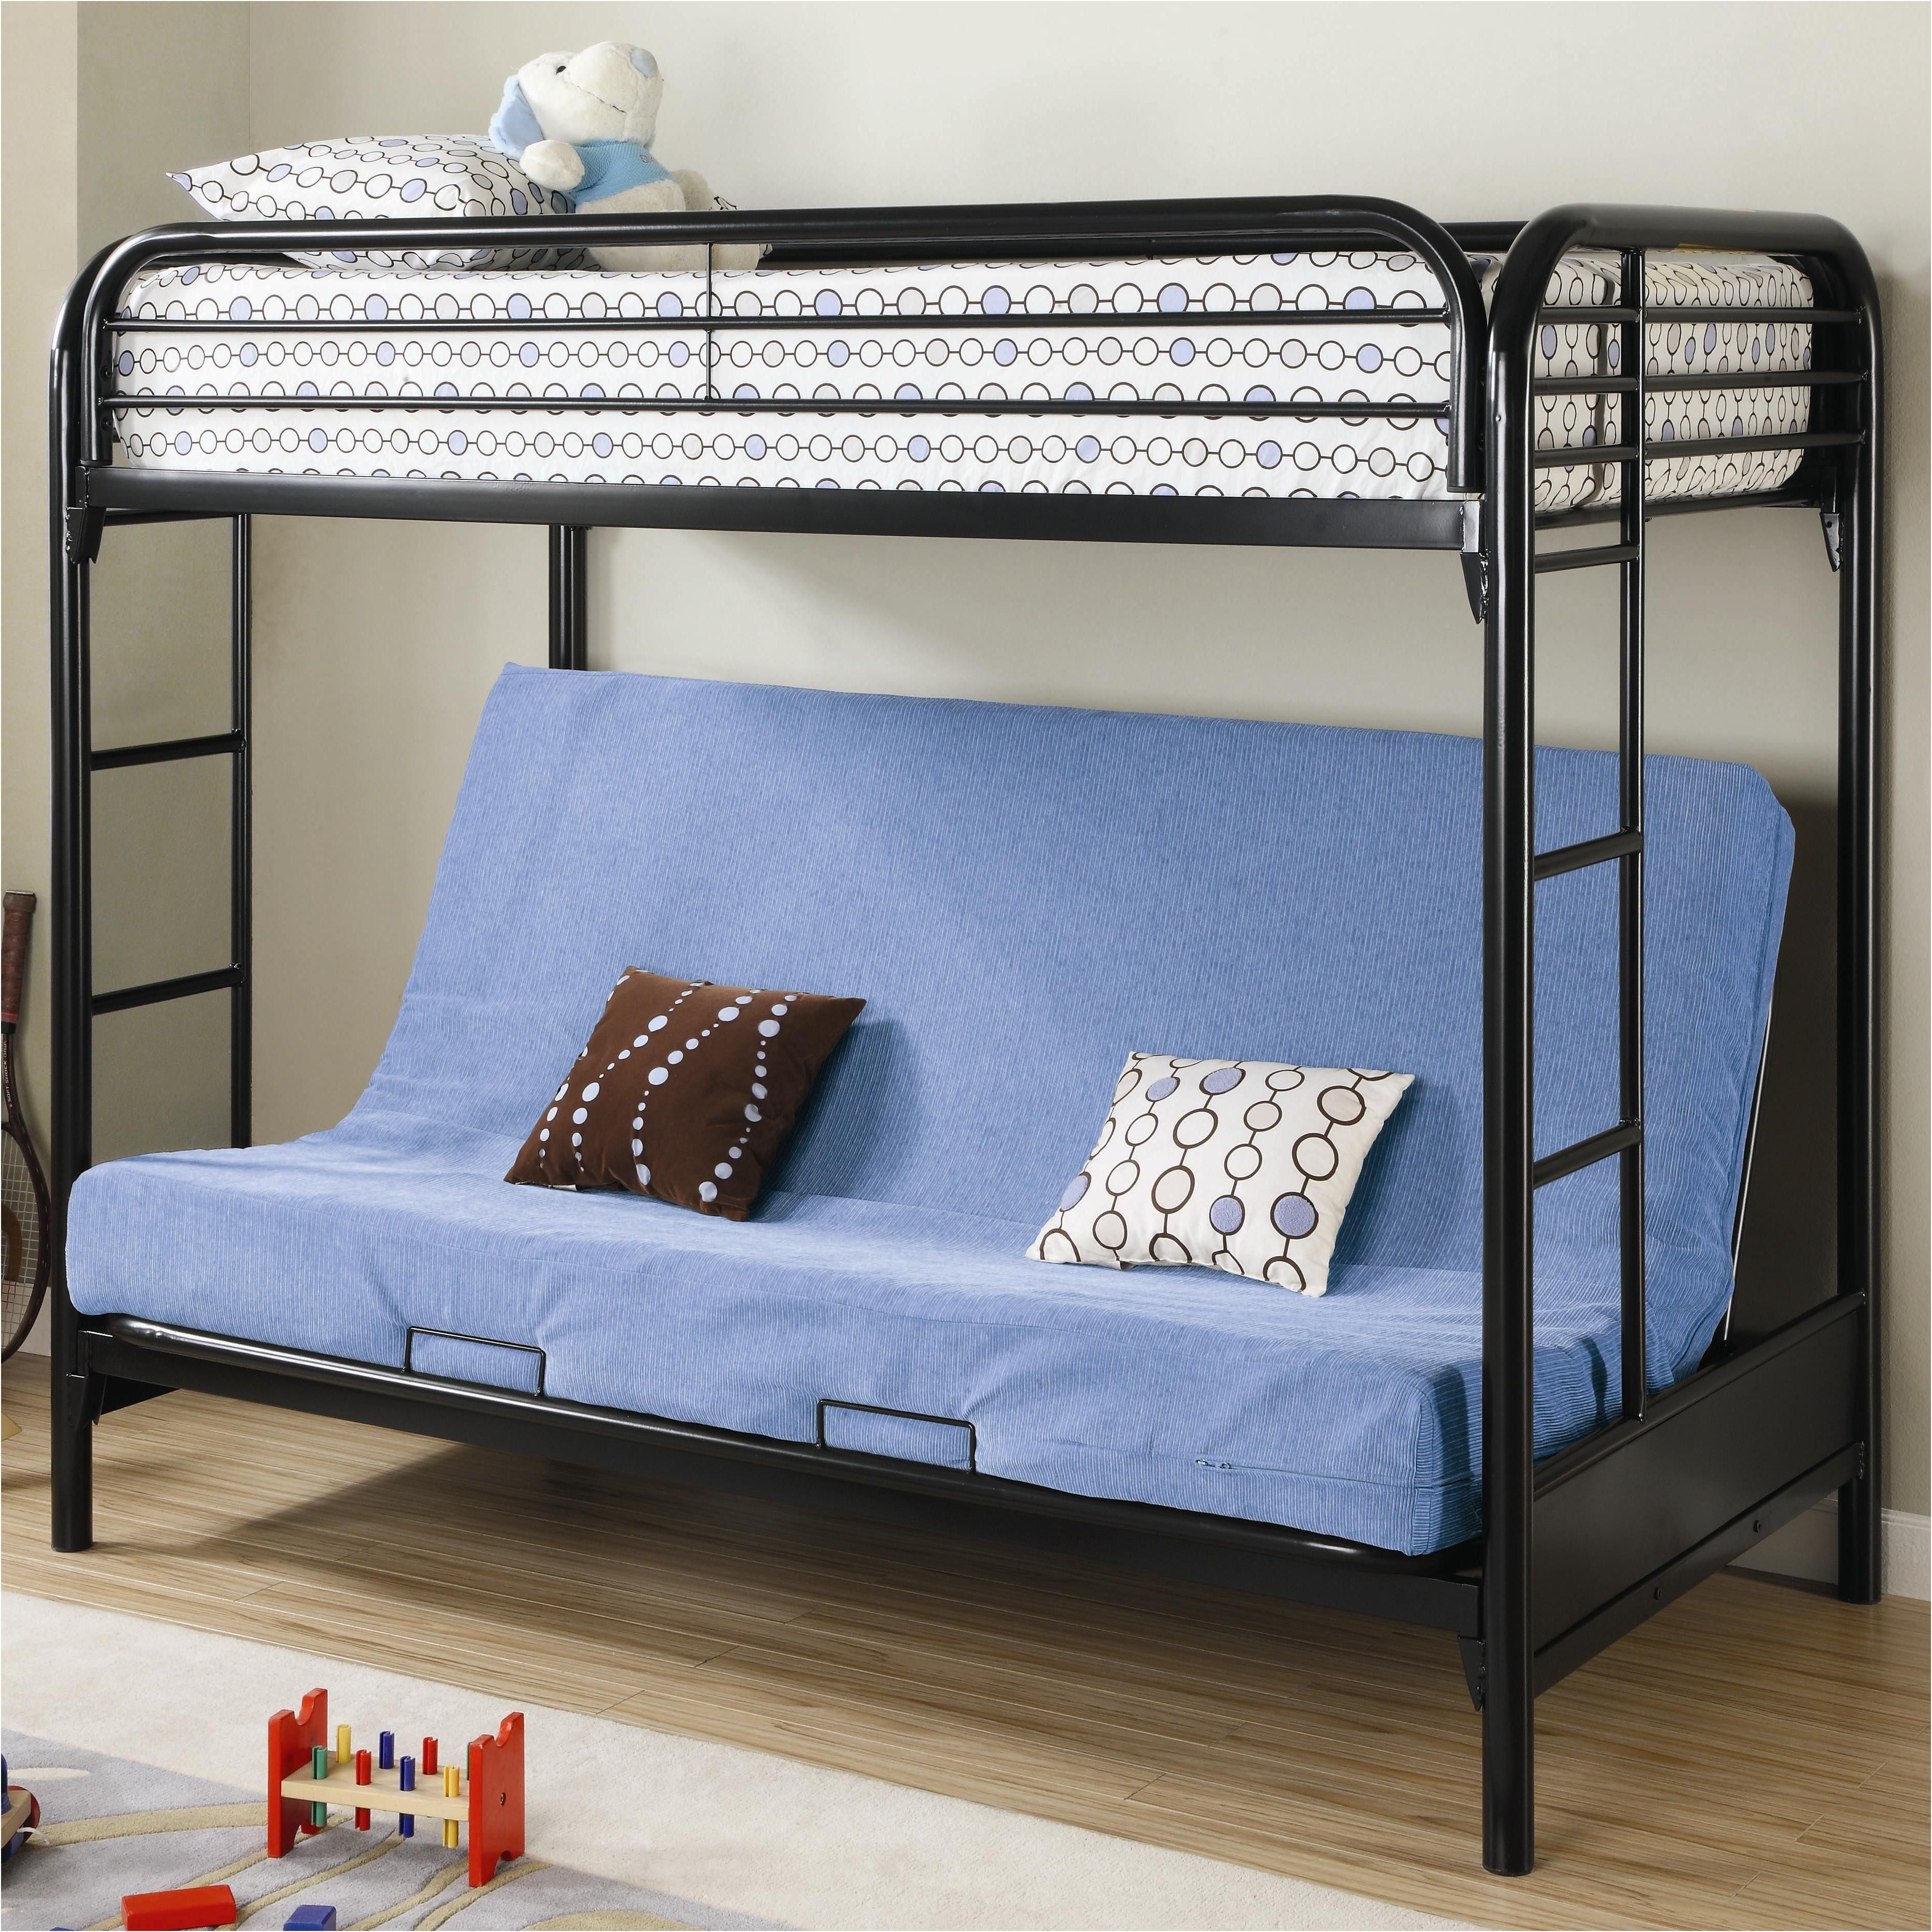 Lit Rond Ikea Sultan Élégant sofa Bunk Bed Ikea Fresh Couch Beds Loft Sectional sofas with